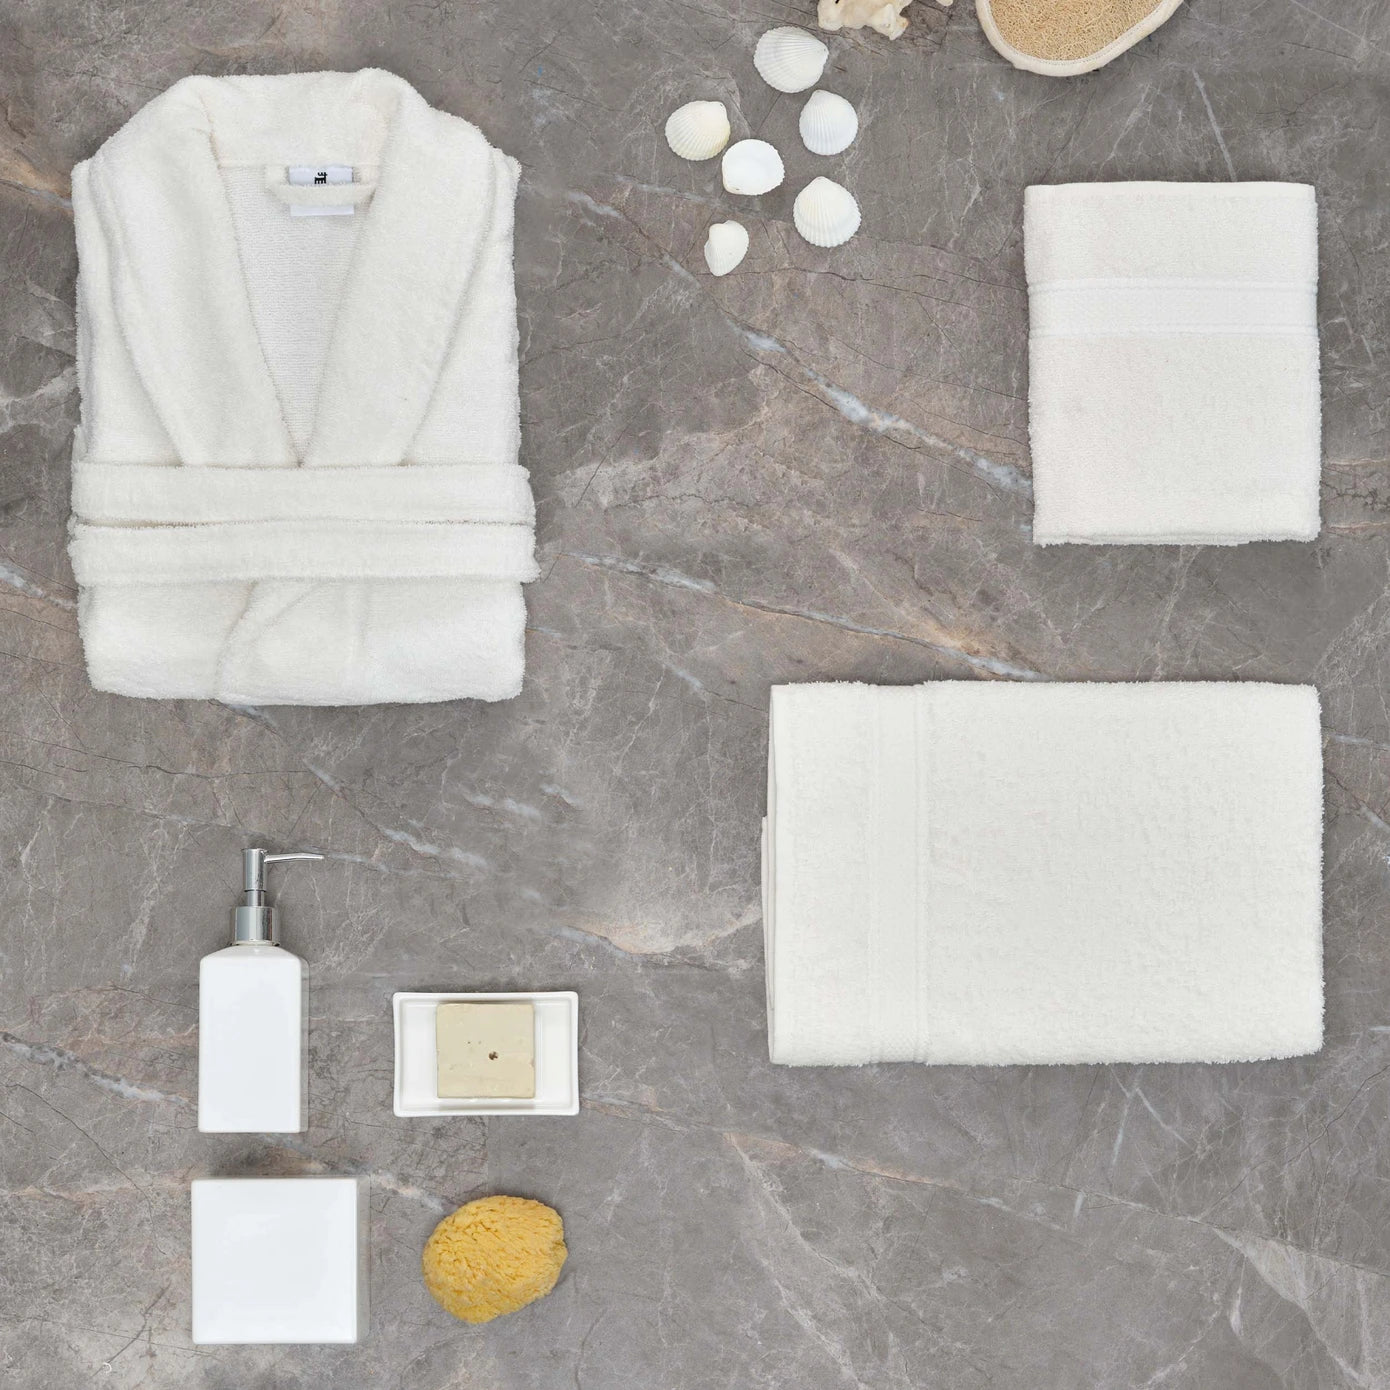 White bathrobe made from 100% cotton, providing a soft and comfortable experience.